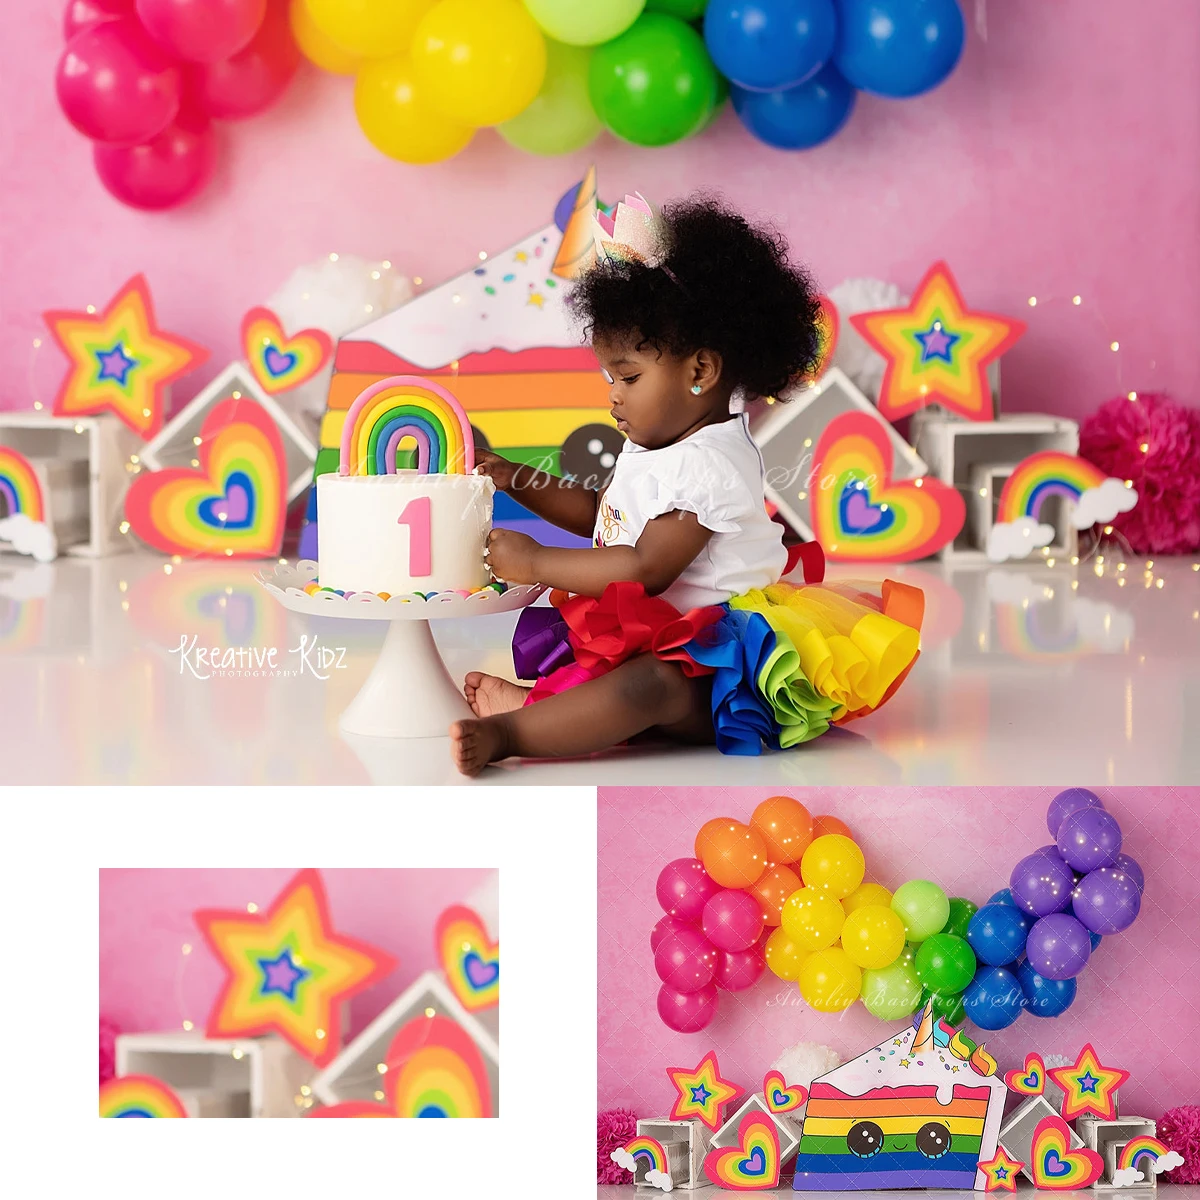 

Rainbow Balloon Backgrounds Cake Smash Kids Adult Photography Props Child Baby Decors Colored Stars Photo Backdrops